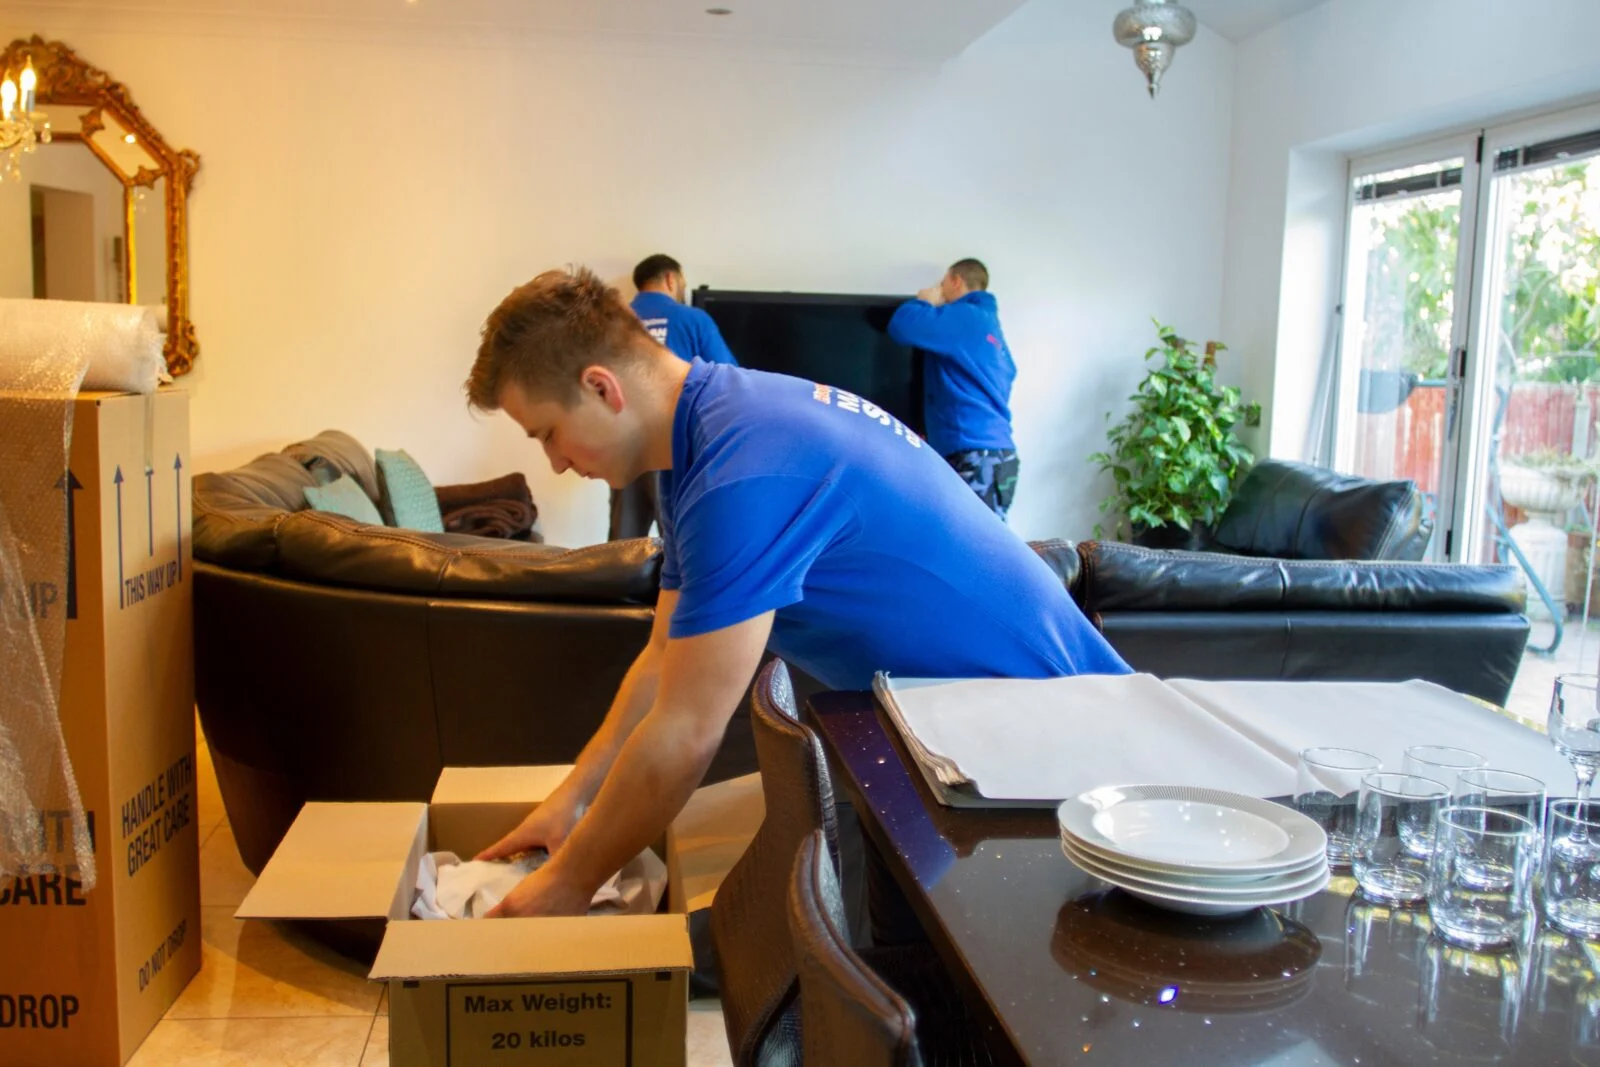 How Much Do Movers and Packers Cost in Abbotsford?